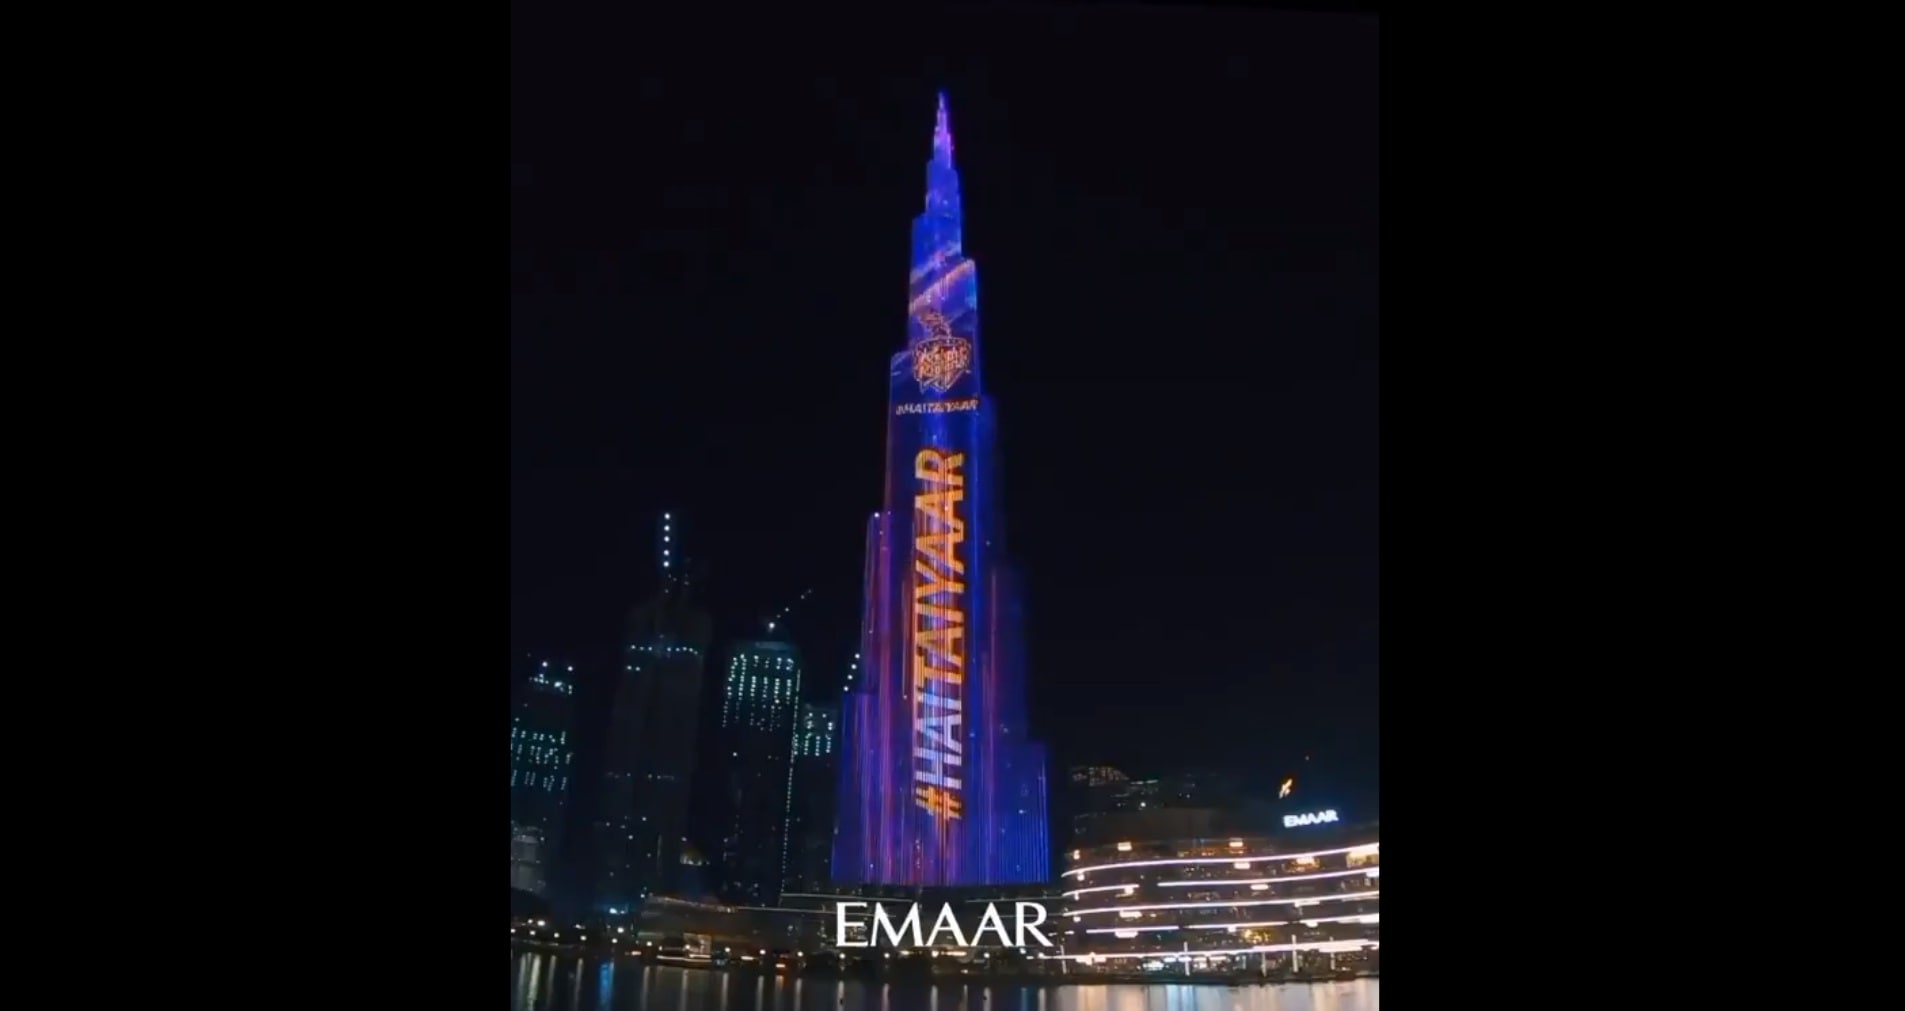 Burj Khalifa Welcomes KKR in the IPL 2020 By lighting up the KKR's Colour on their Building Display